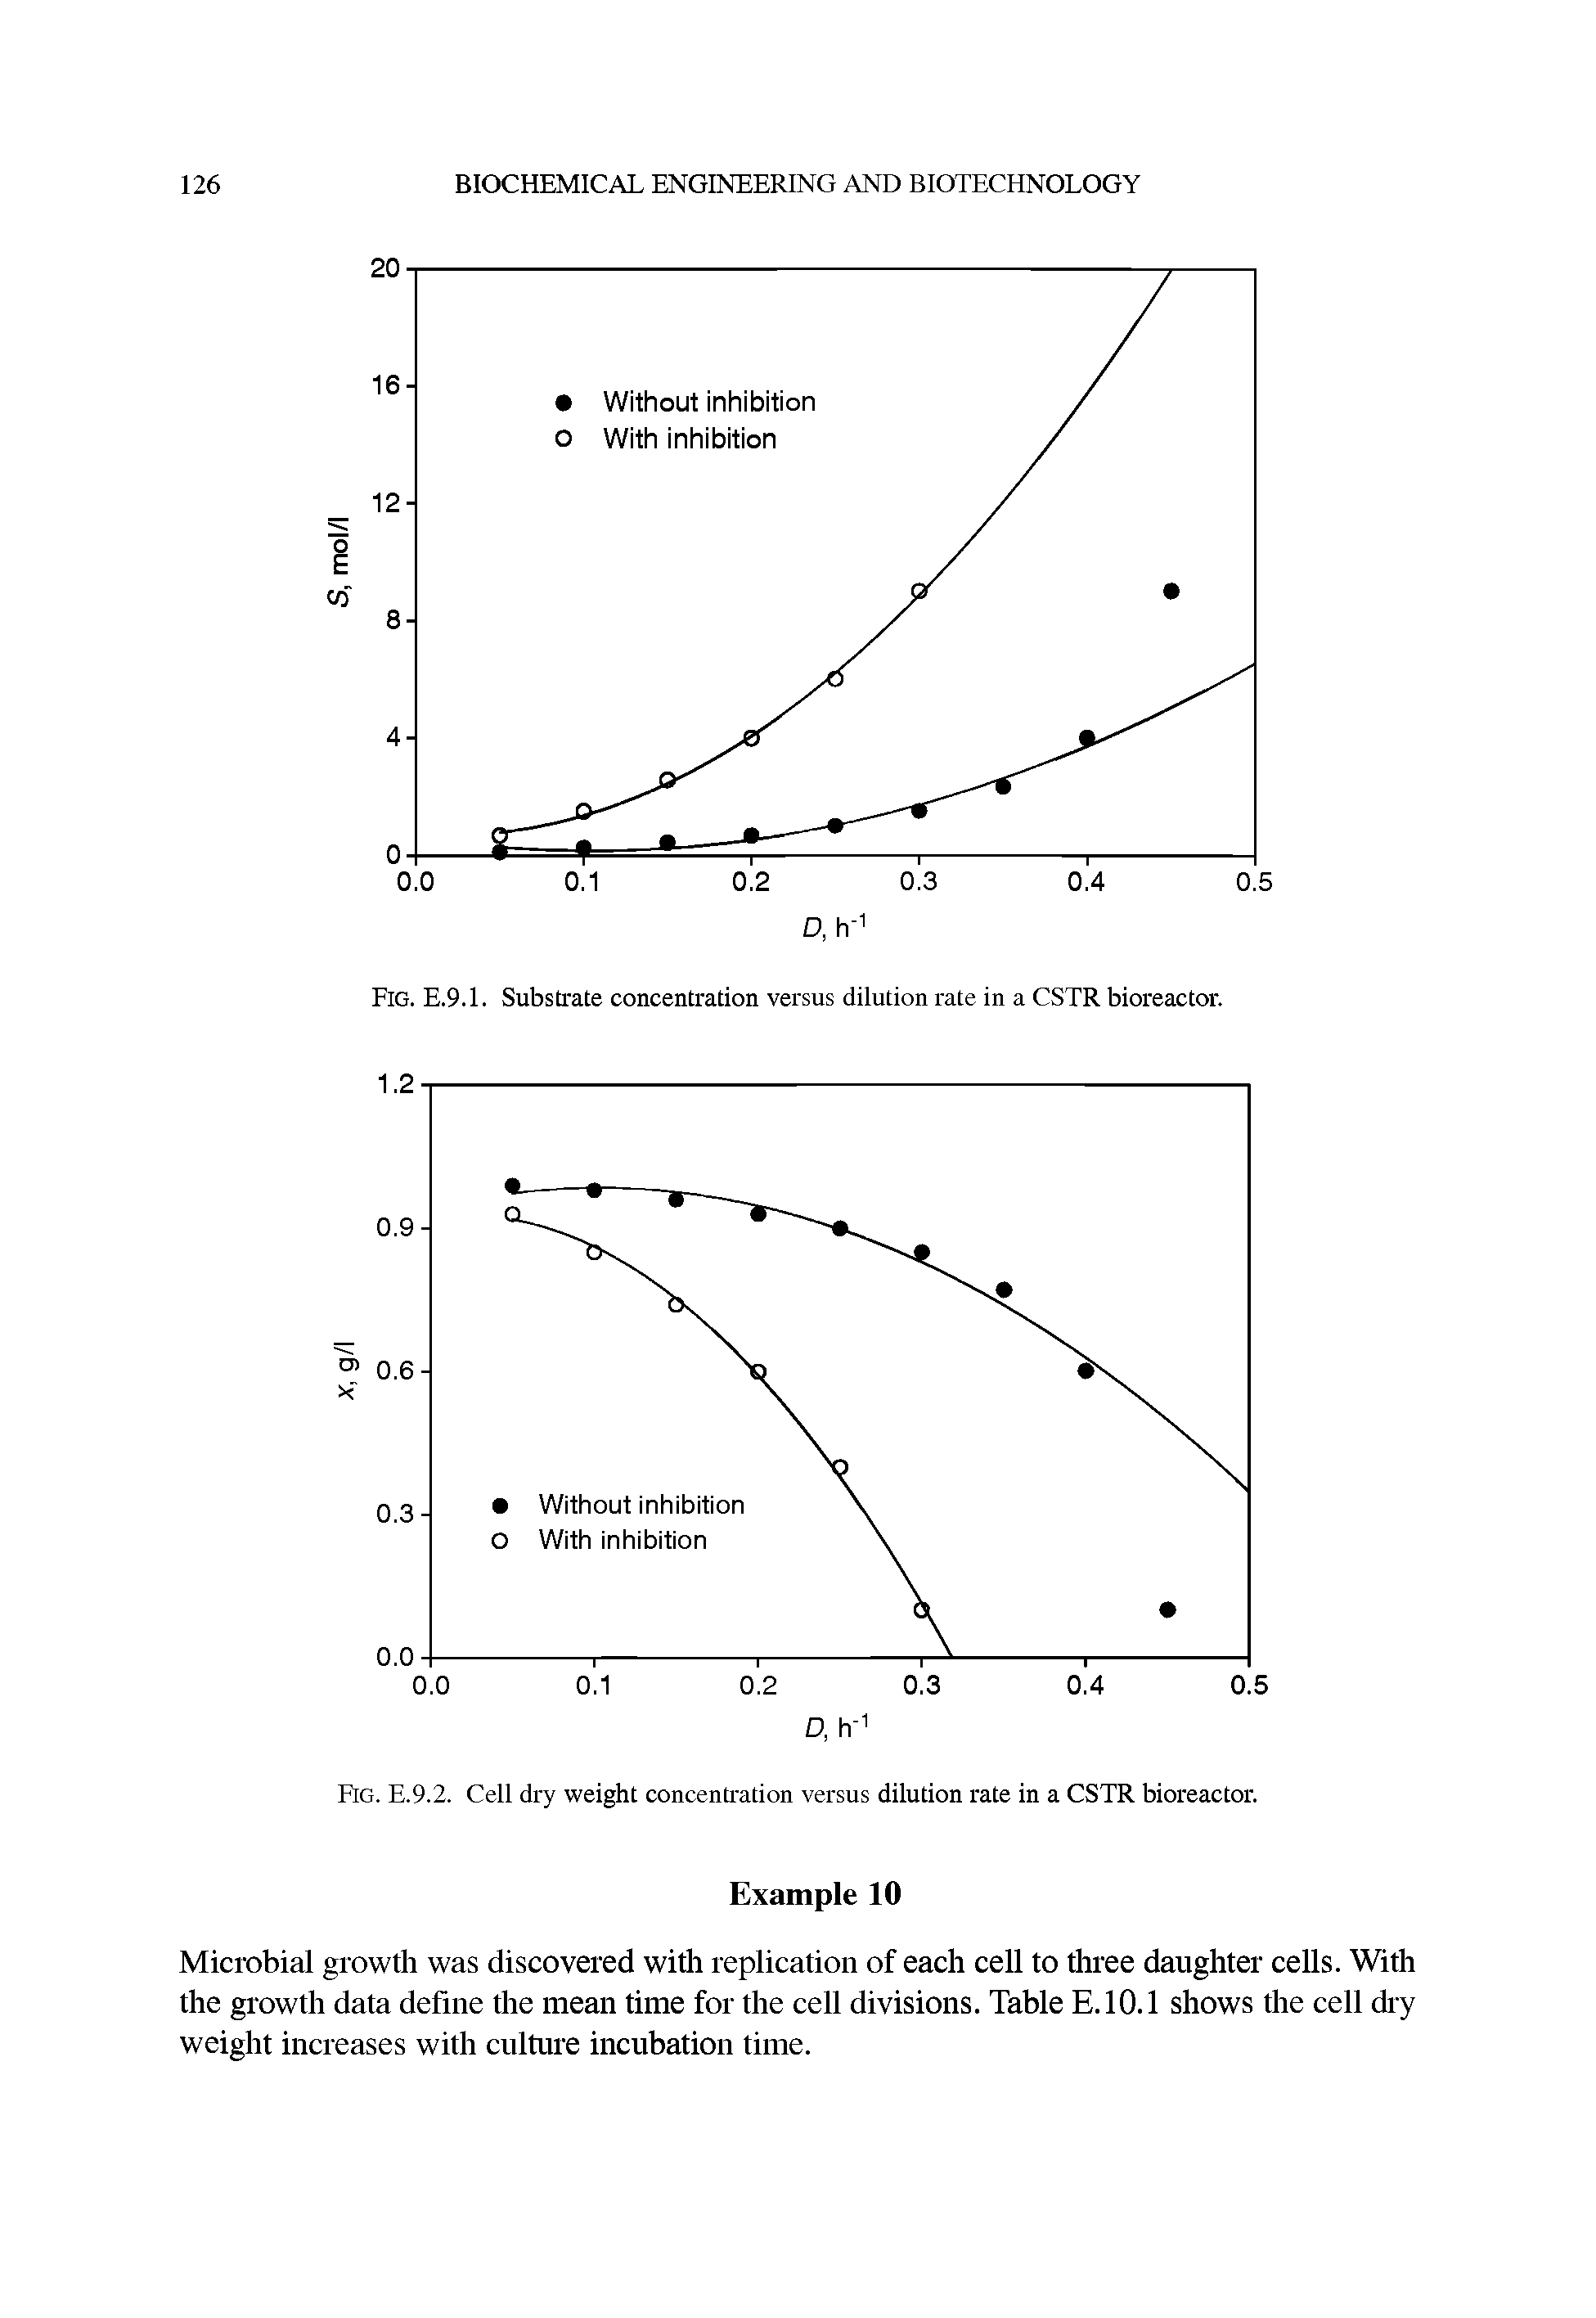 Fig. E.9.2. Cell dry weight concentration versus dilution rate in a CSTR bioreactor.